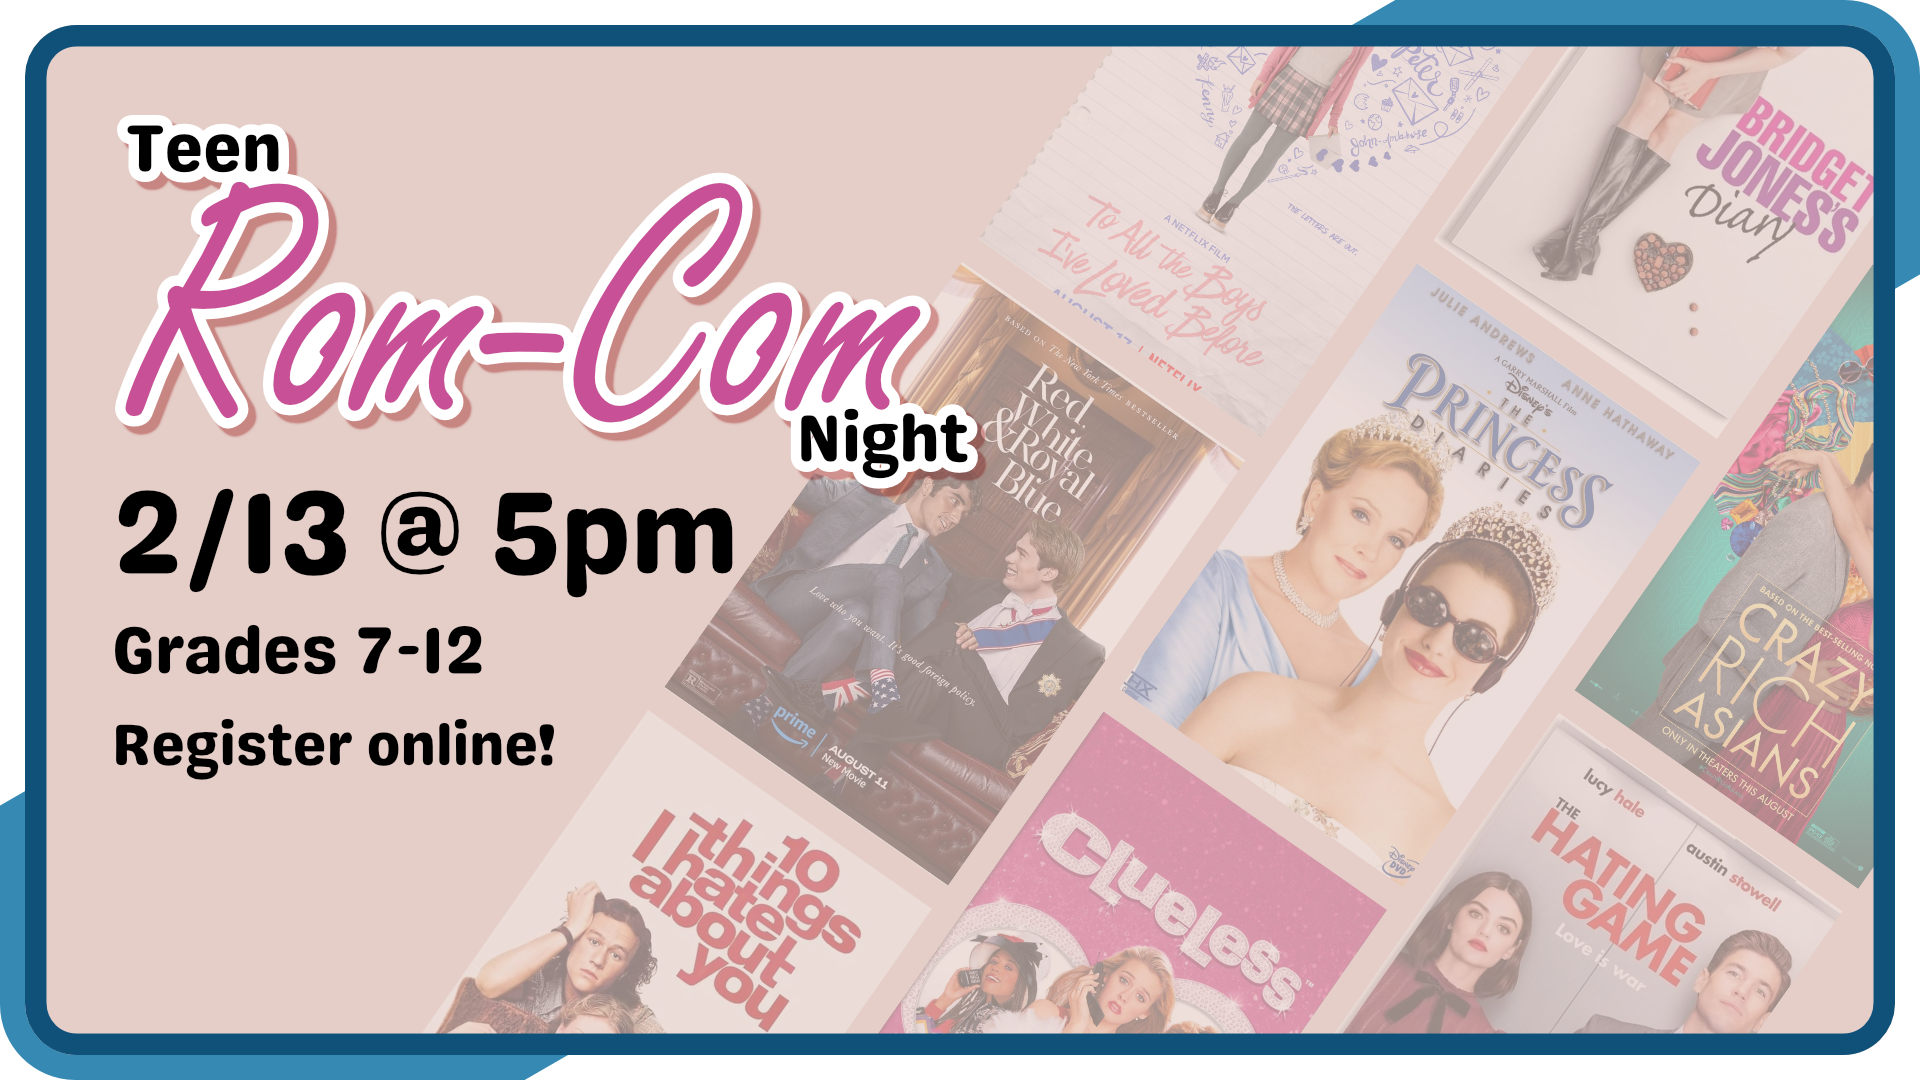 Teen Rom-Com Night, February 13th at 5pm, intended for grades 7 through 12, registration required